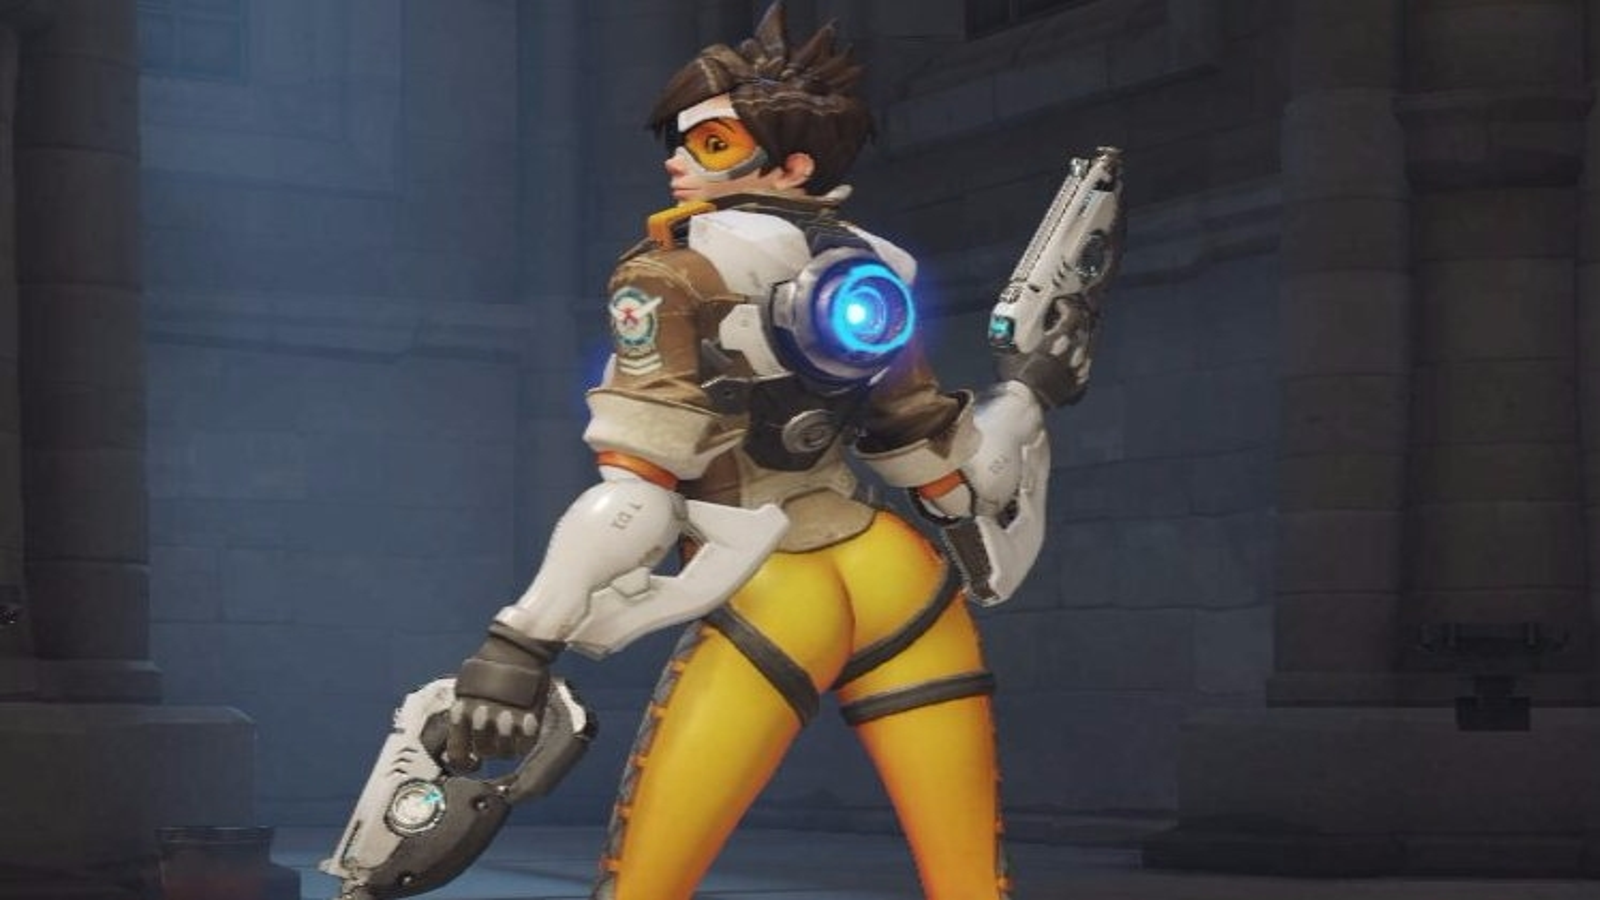 Blizzard replaces Tracer's butt pose in Overwatch with a better butt pose -  SiliconANGLE